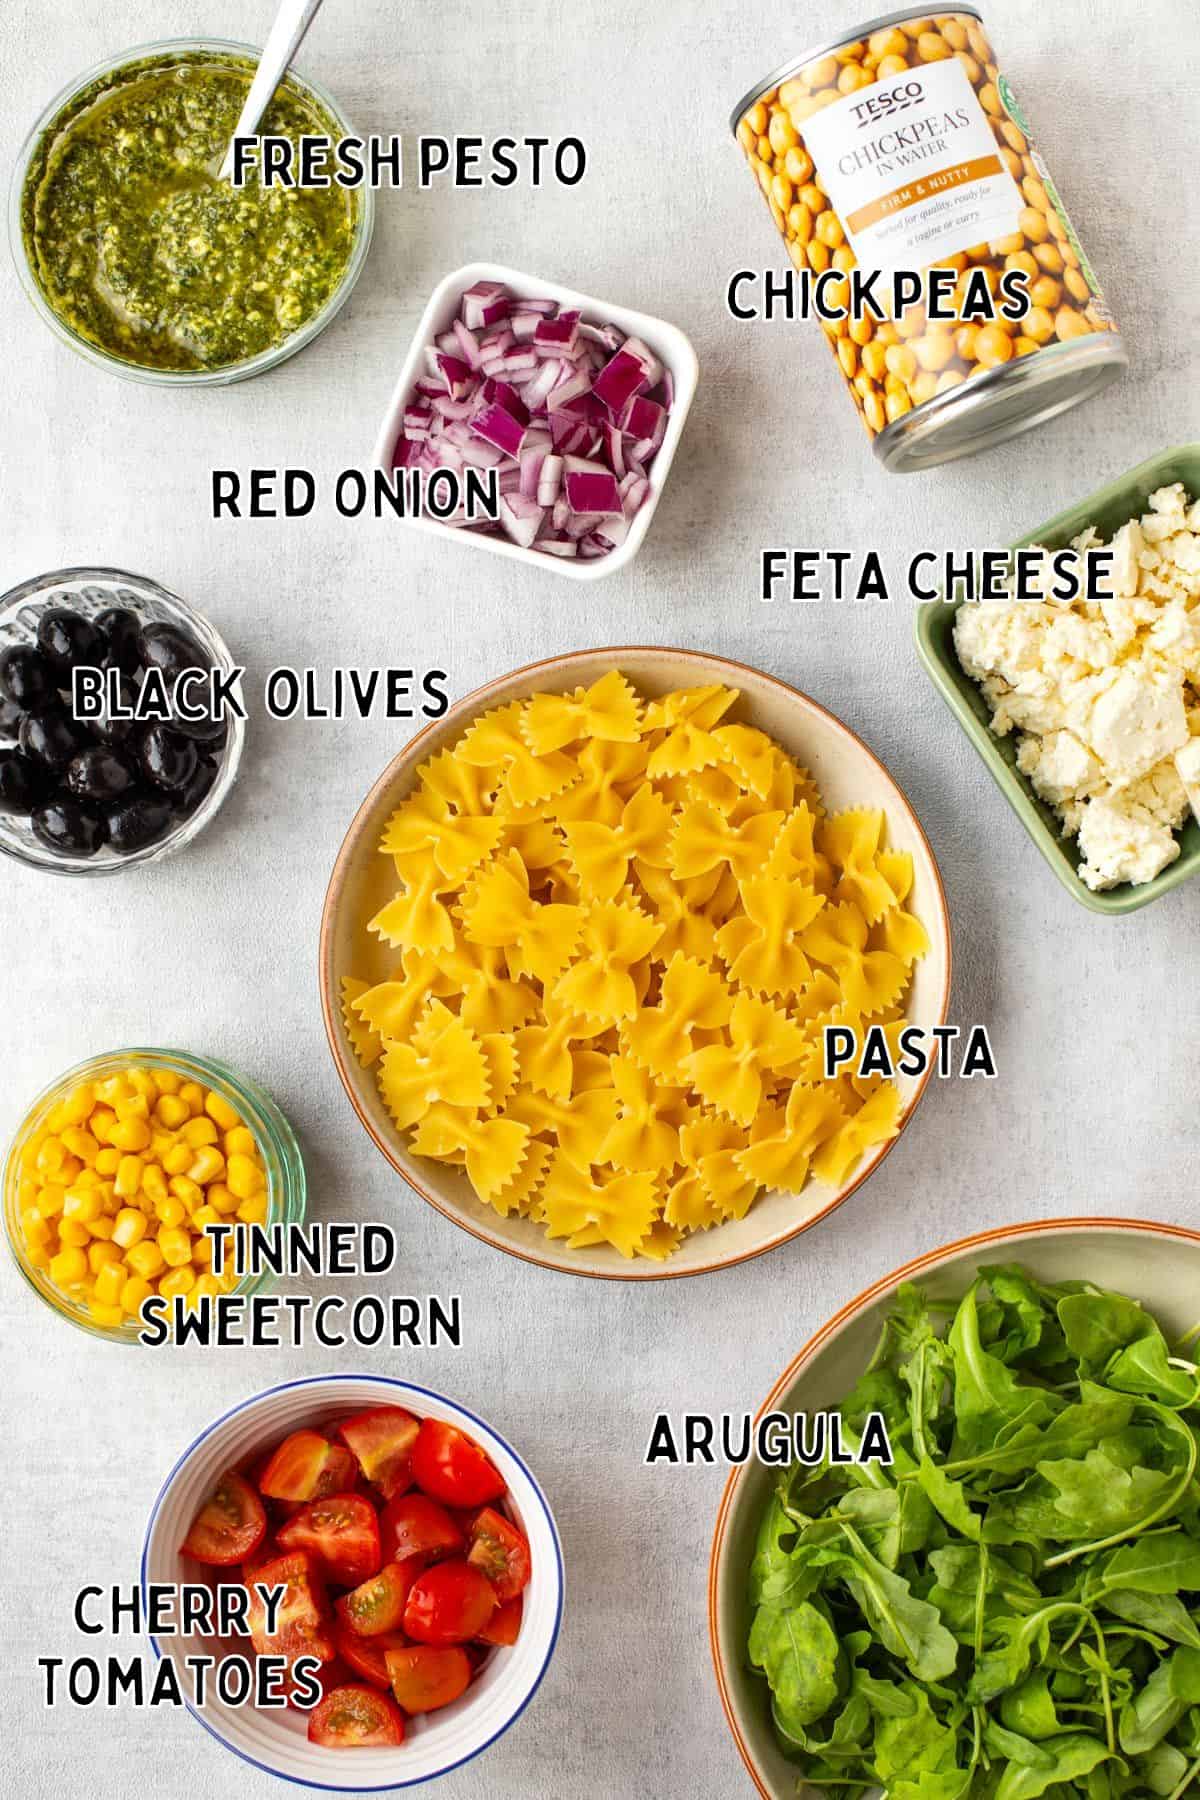 Ingredients for chickpea pasta salad with text overlay.